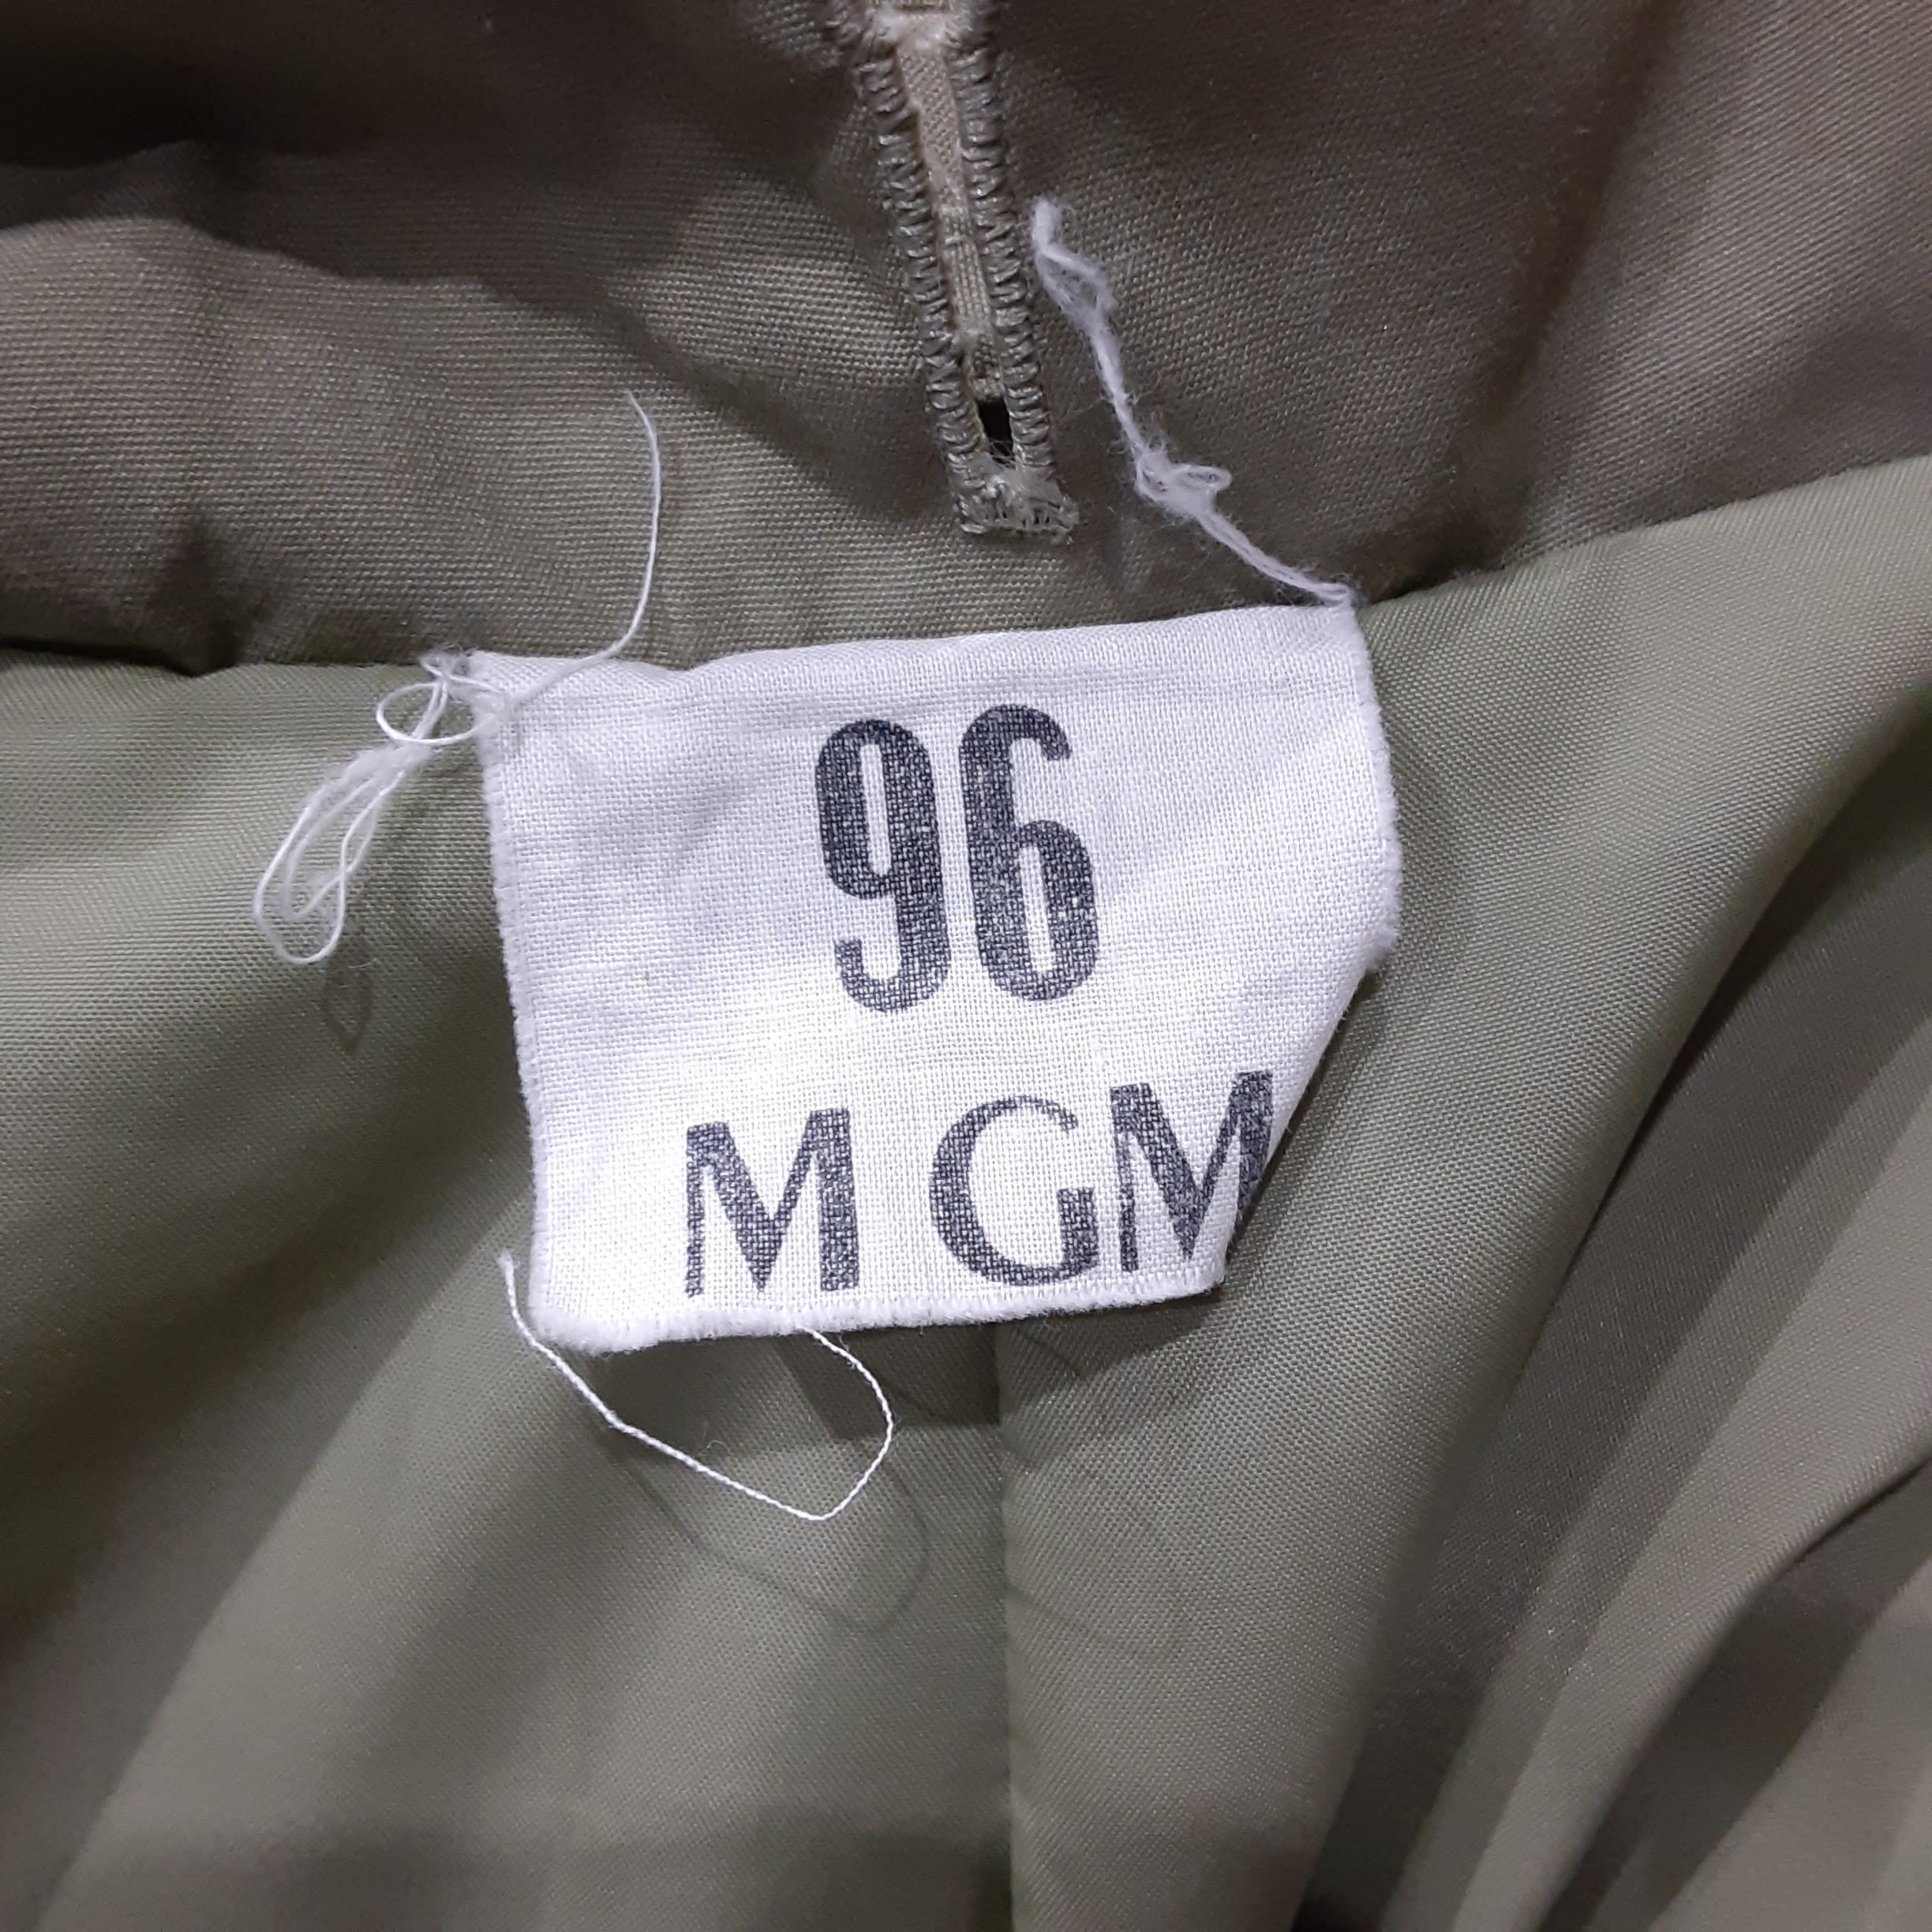 1968 French Military Officer Trench Coat 1968年製　フランス軍　士官用　トレンチコート